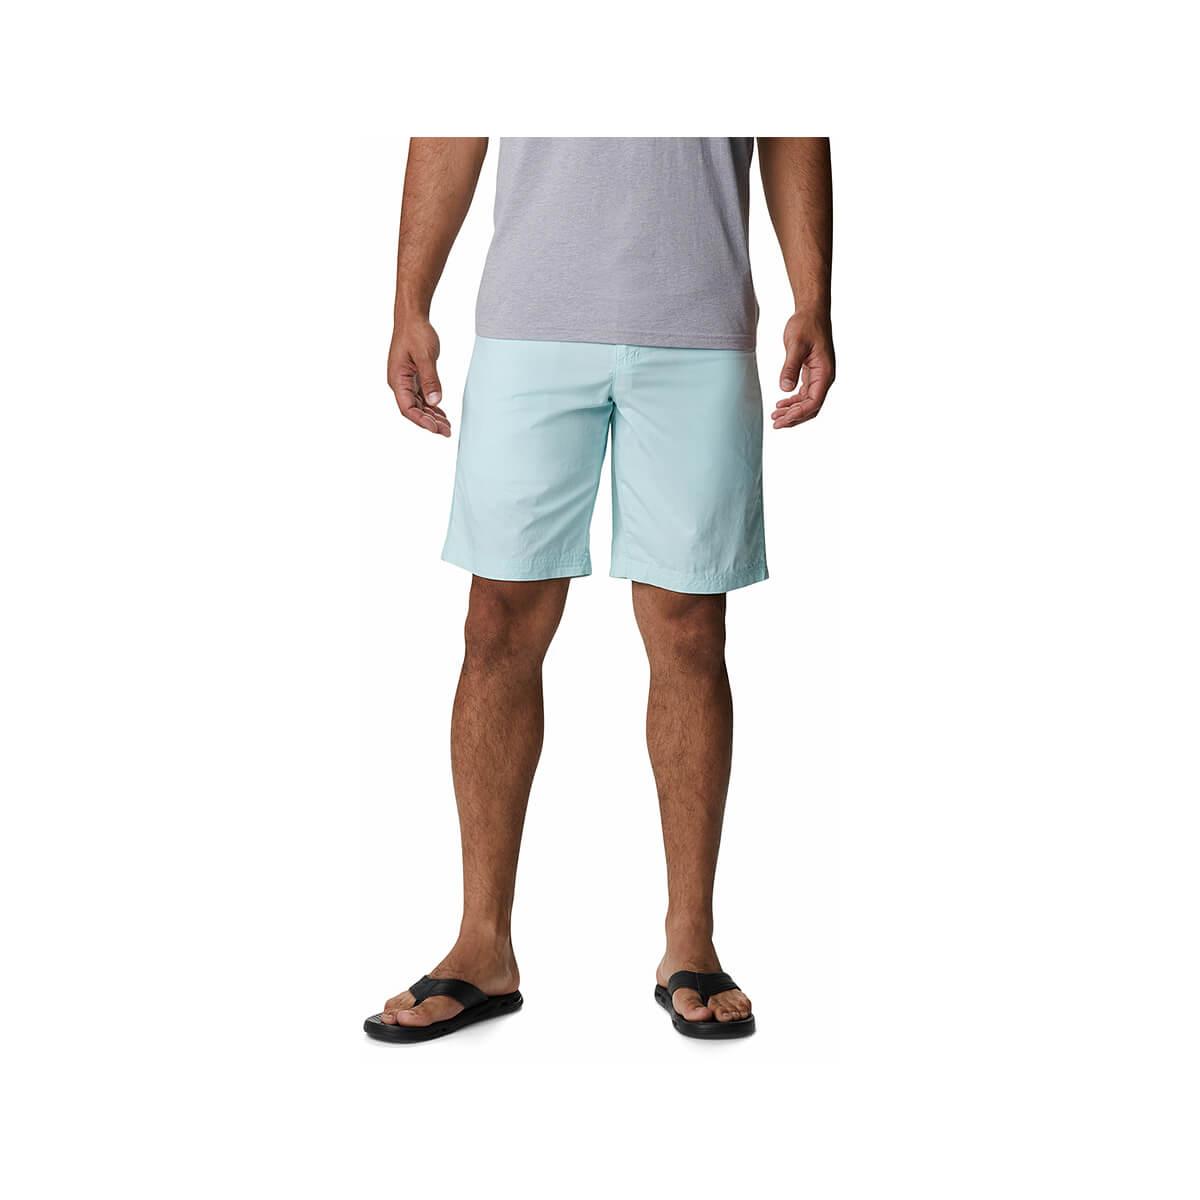  Men's Washed Out Chino Shorts - 8 Inch Inseam